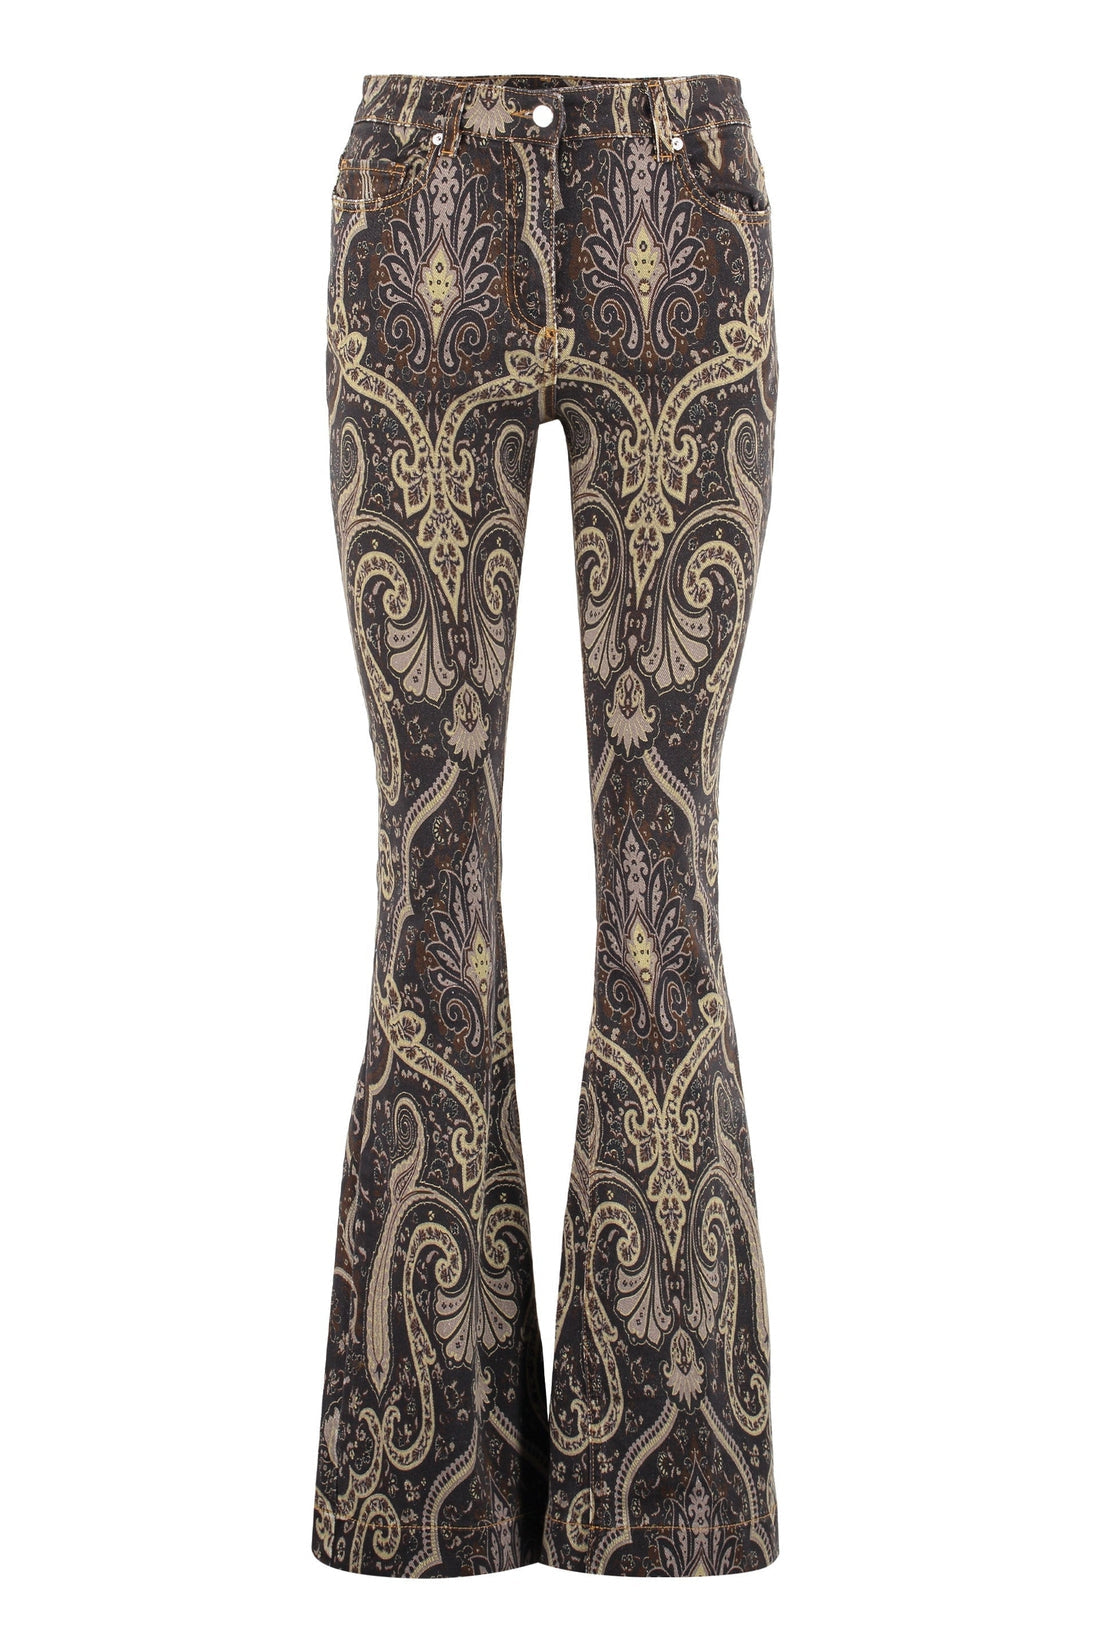 Etro-OUTLET-SALE-Printed flared jeans-ARCHIVIST